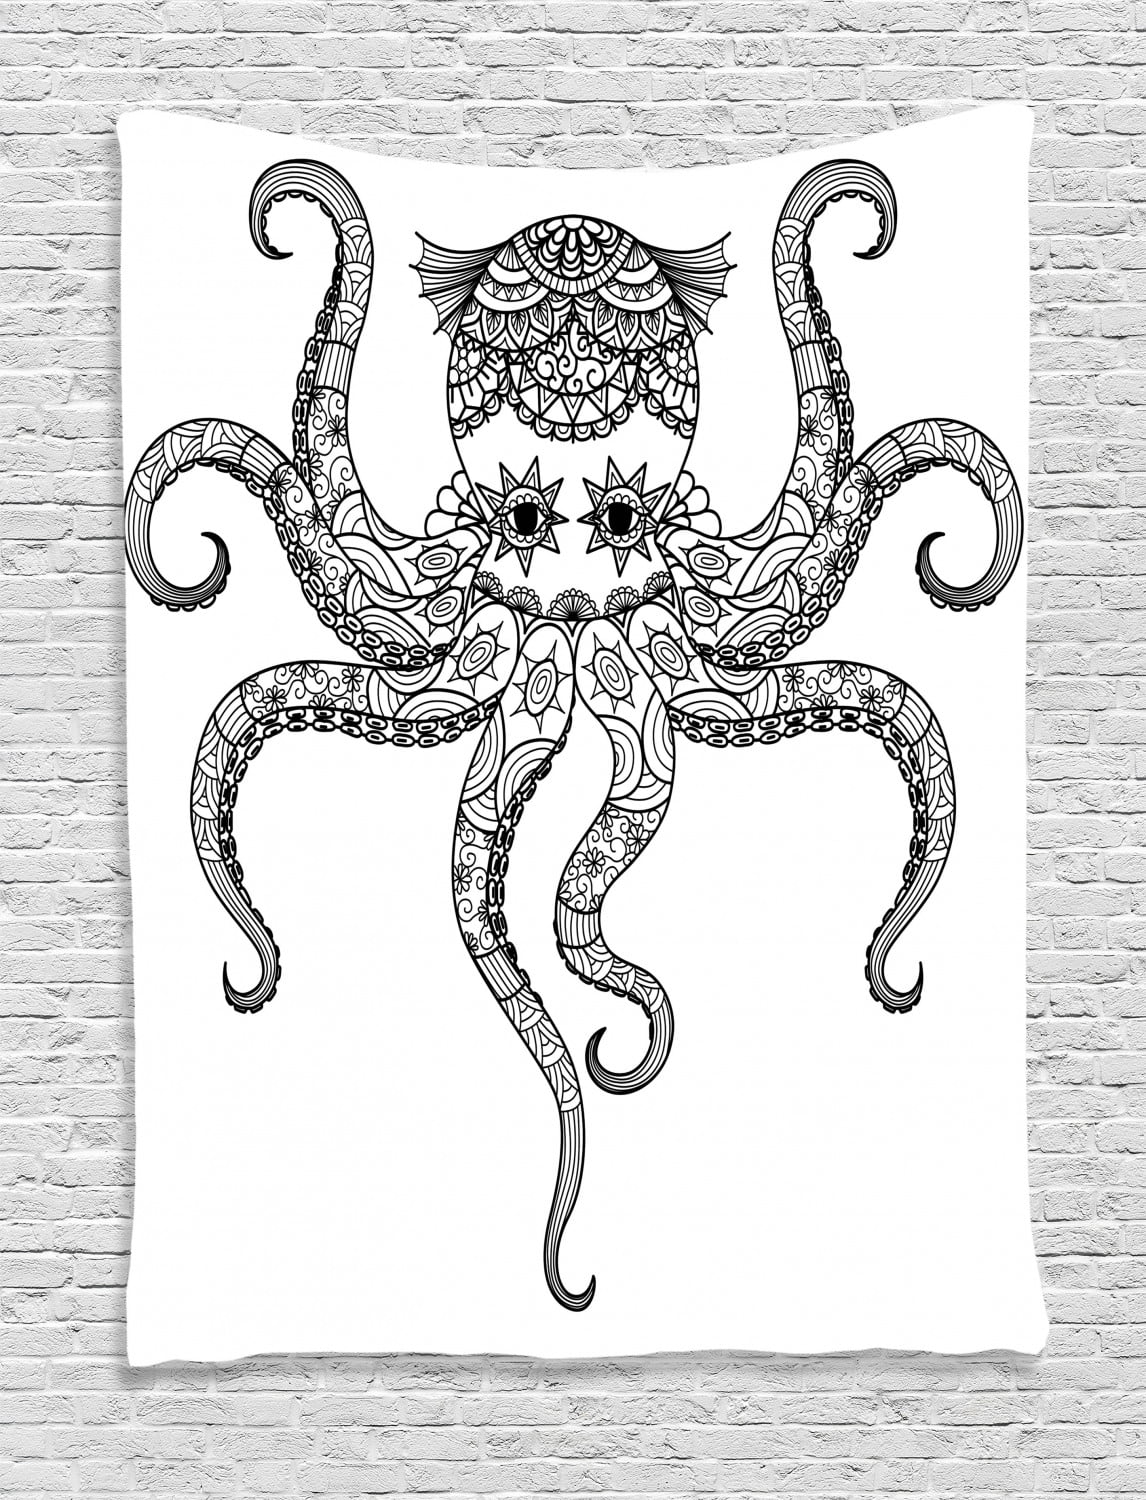 Download Octopus Decor Wall Hanging Tapestry, Octopus Doodle ...